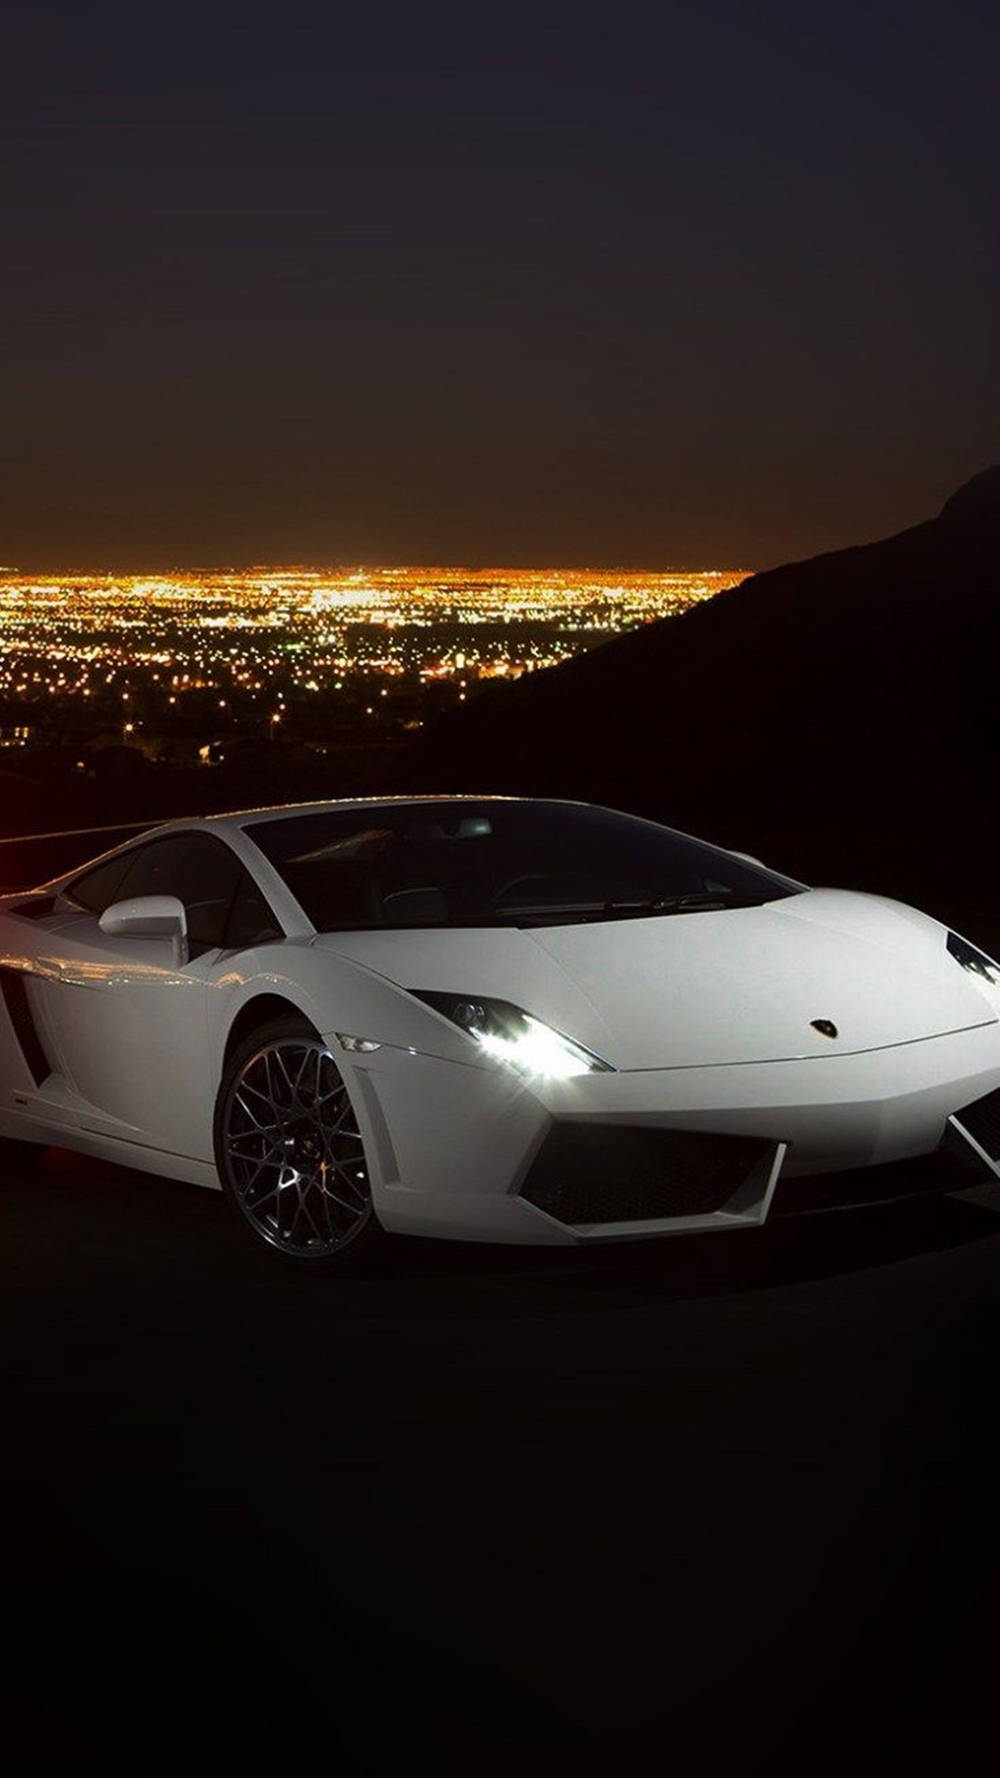 Stunning View For Iphone Lamborghini Display Background